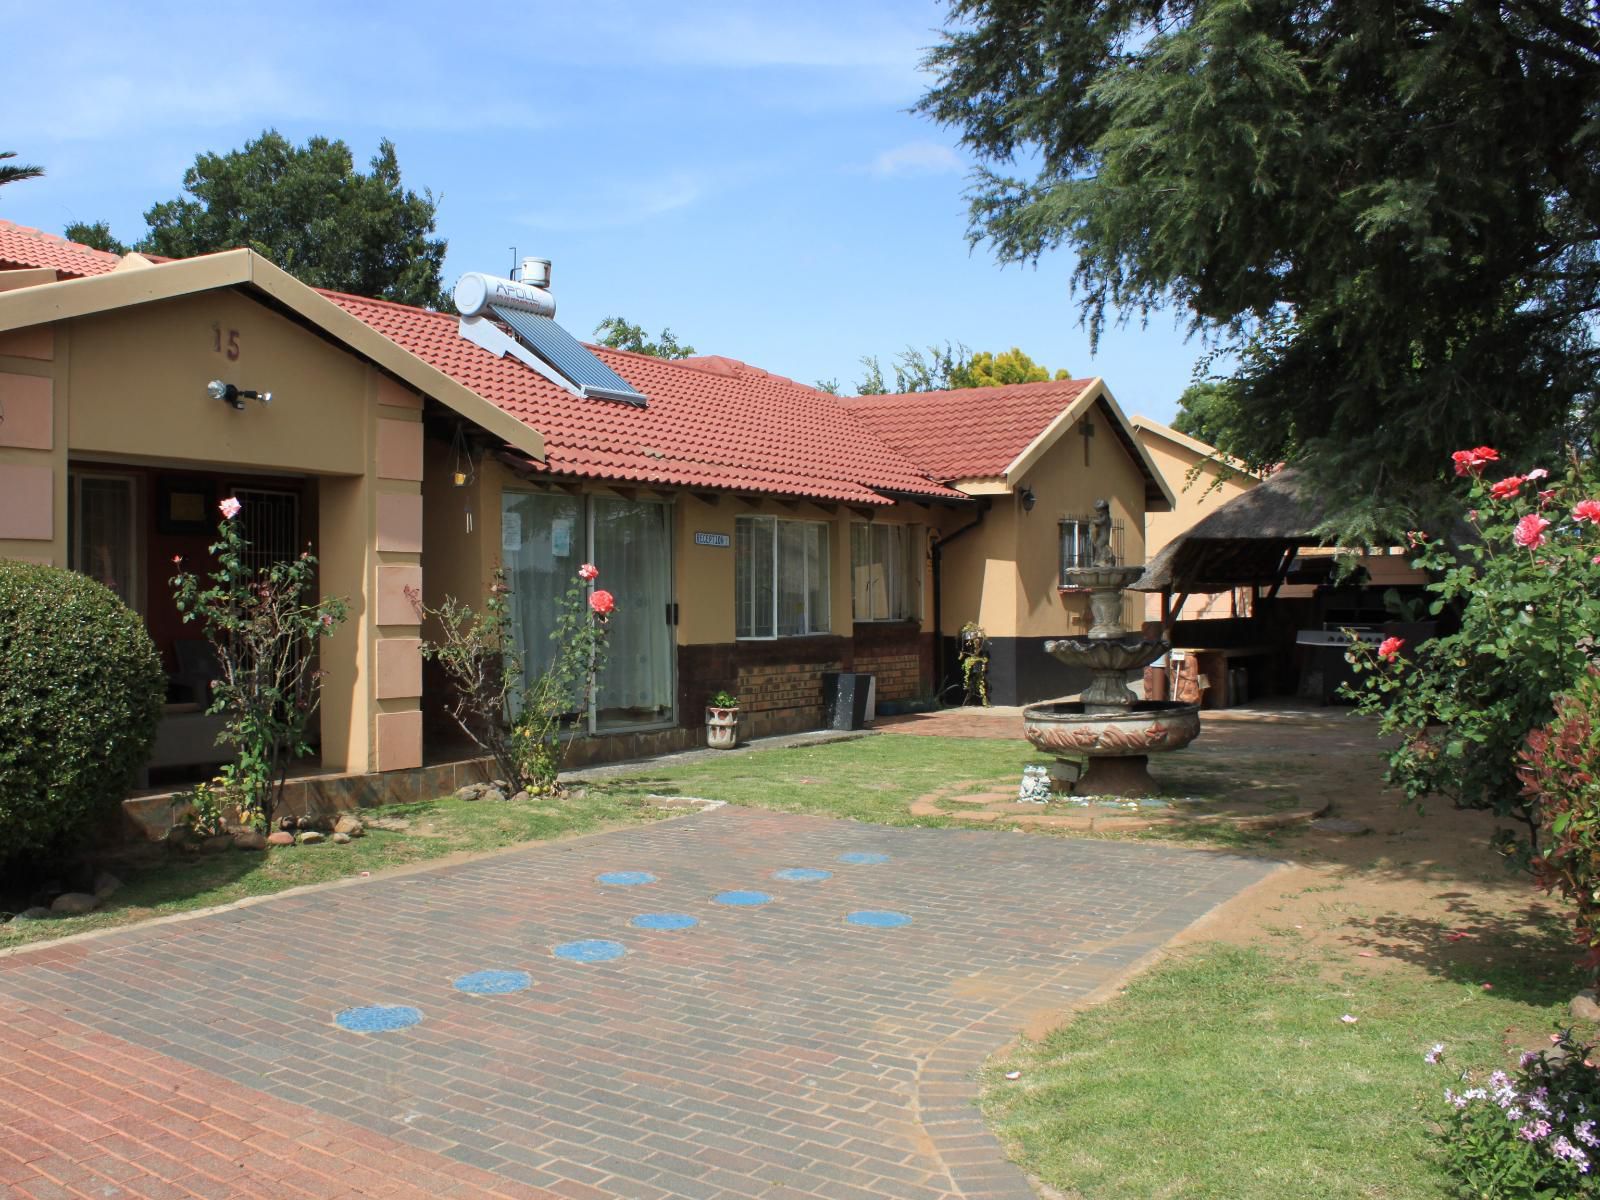 All Are Welcome Brakpan Johannesburg Gauteng South Africa Complementary Colors, House, Building, Architecture